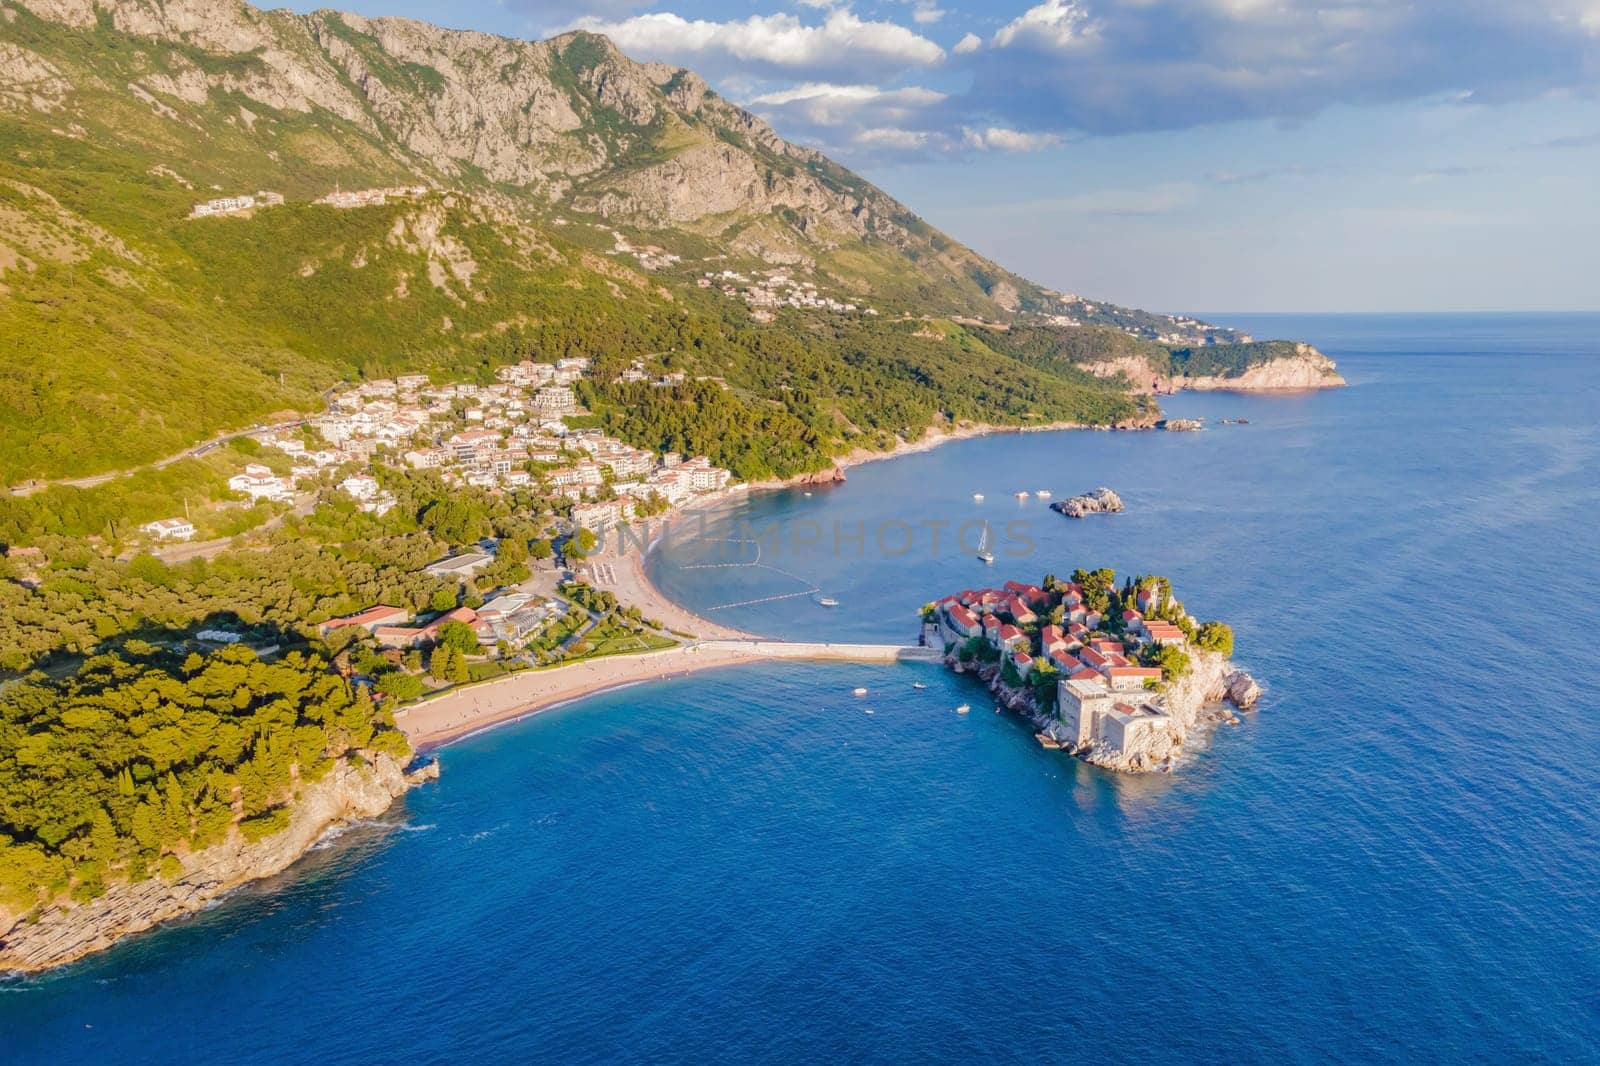 Aerophotography. Aerial view of Sveti Stefan island in a beautiful summer day, Montenegro from flying drone. Panoramic above view of Saint Stephen luxury resort. Tourism and leisure concept.